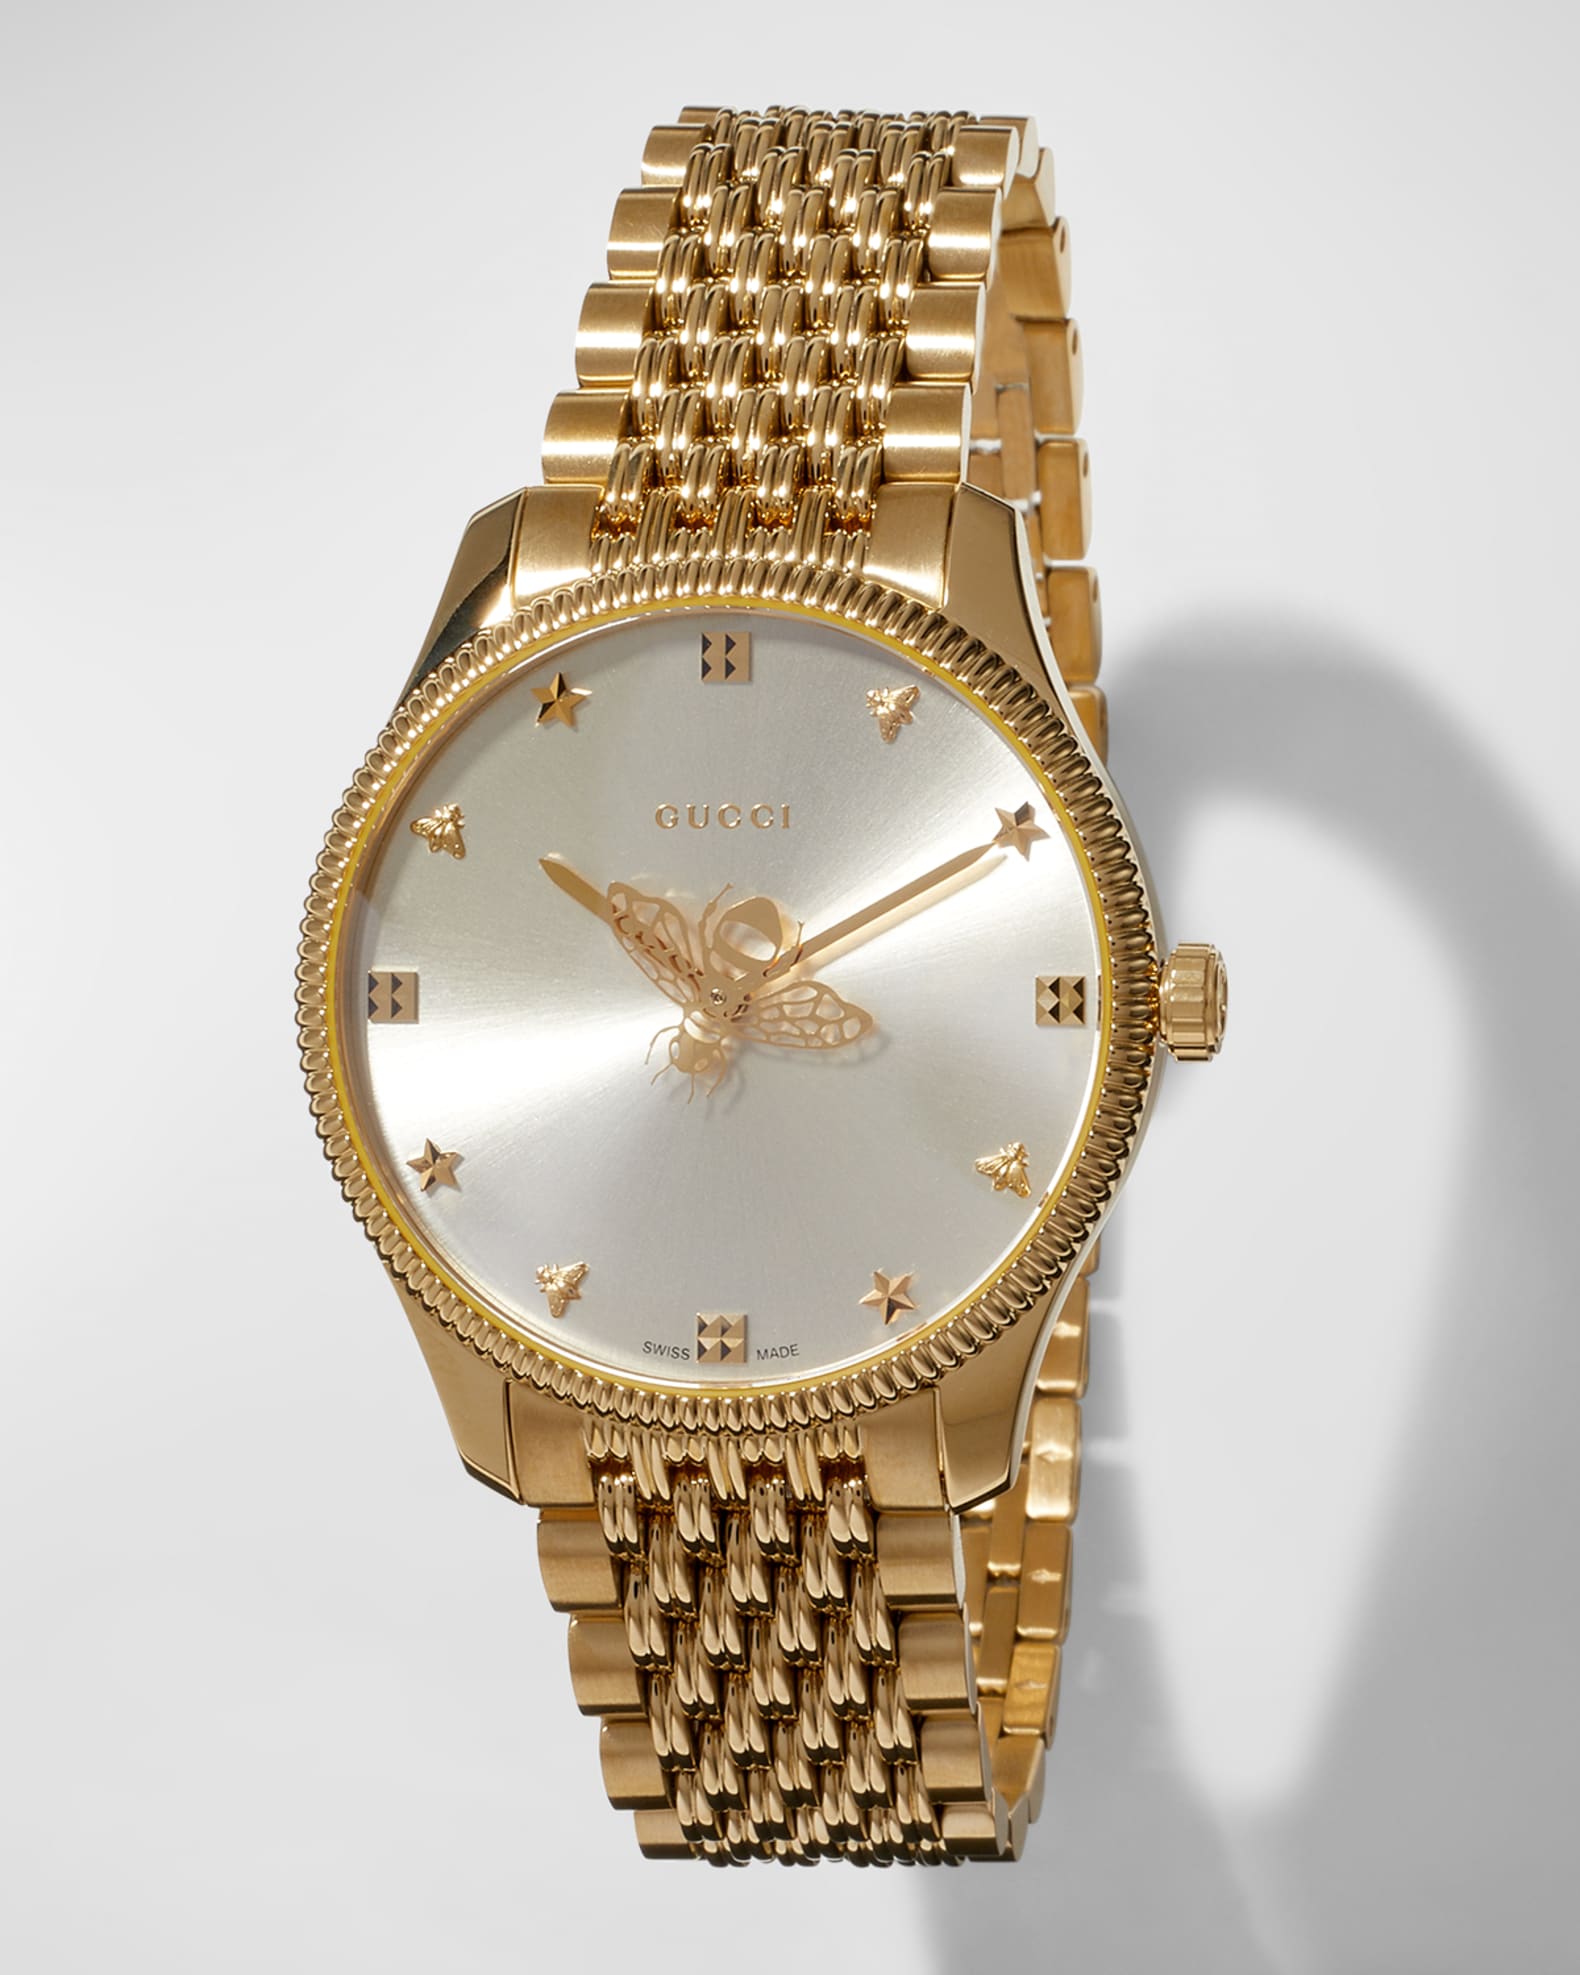 neimanmarcus.com | 36mm G-Timeless Bee Watch with Bracelet Strap, Gold/Silver